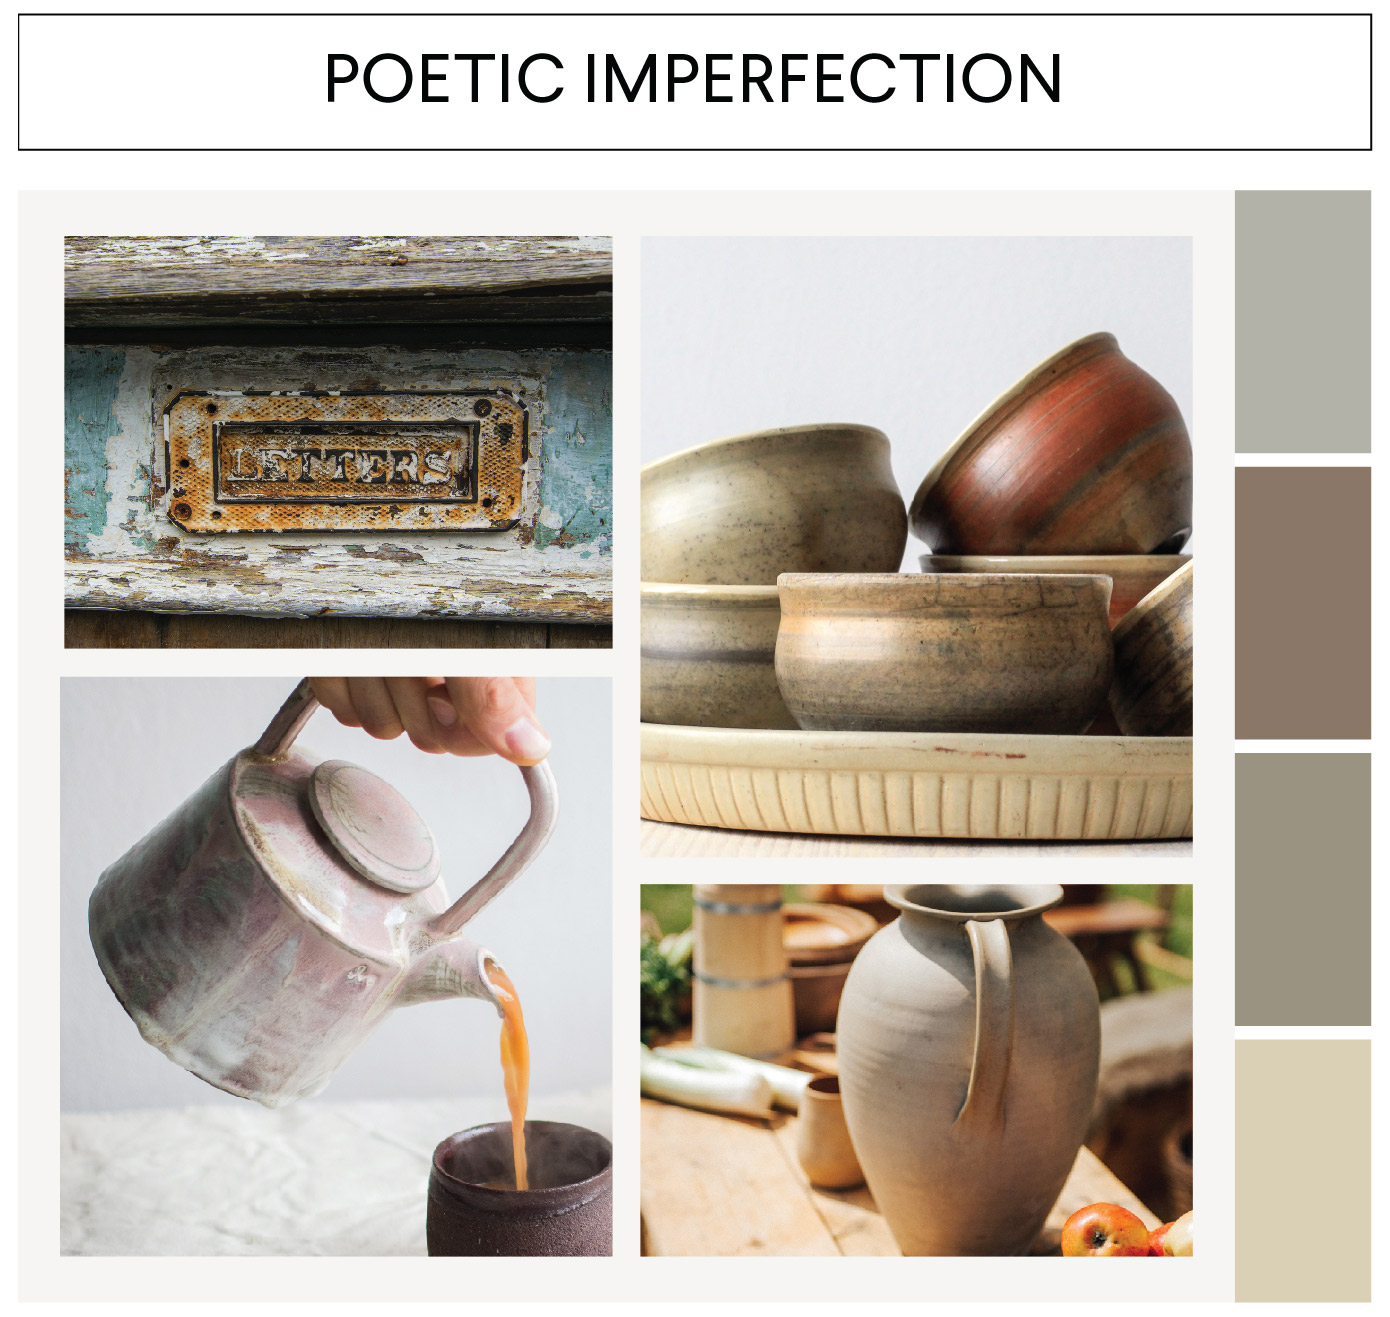 image of rustic pots that links to poetic imperfection page